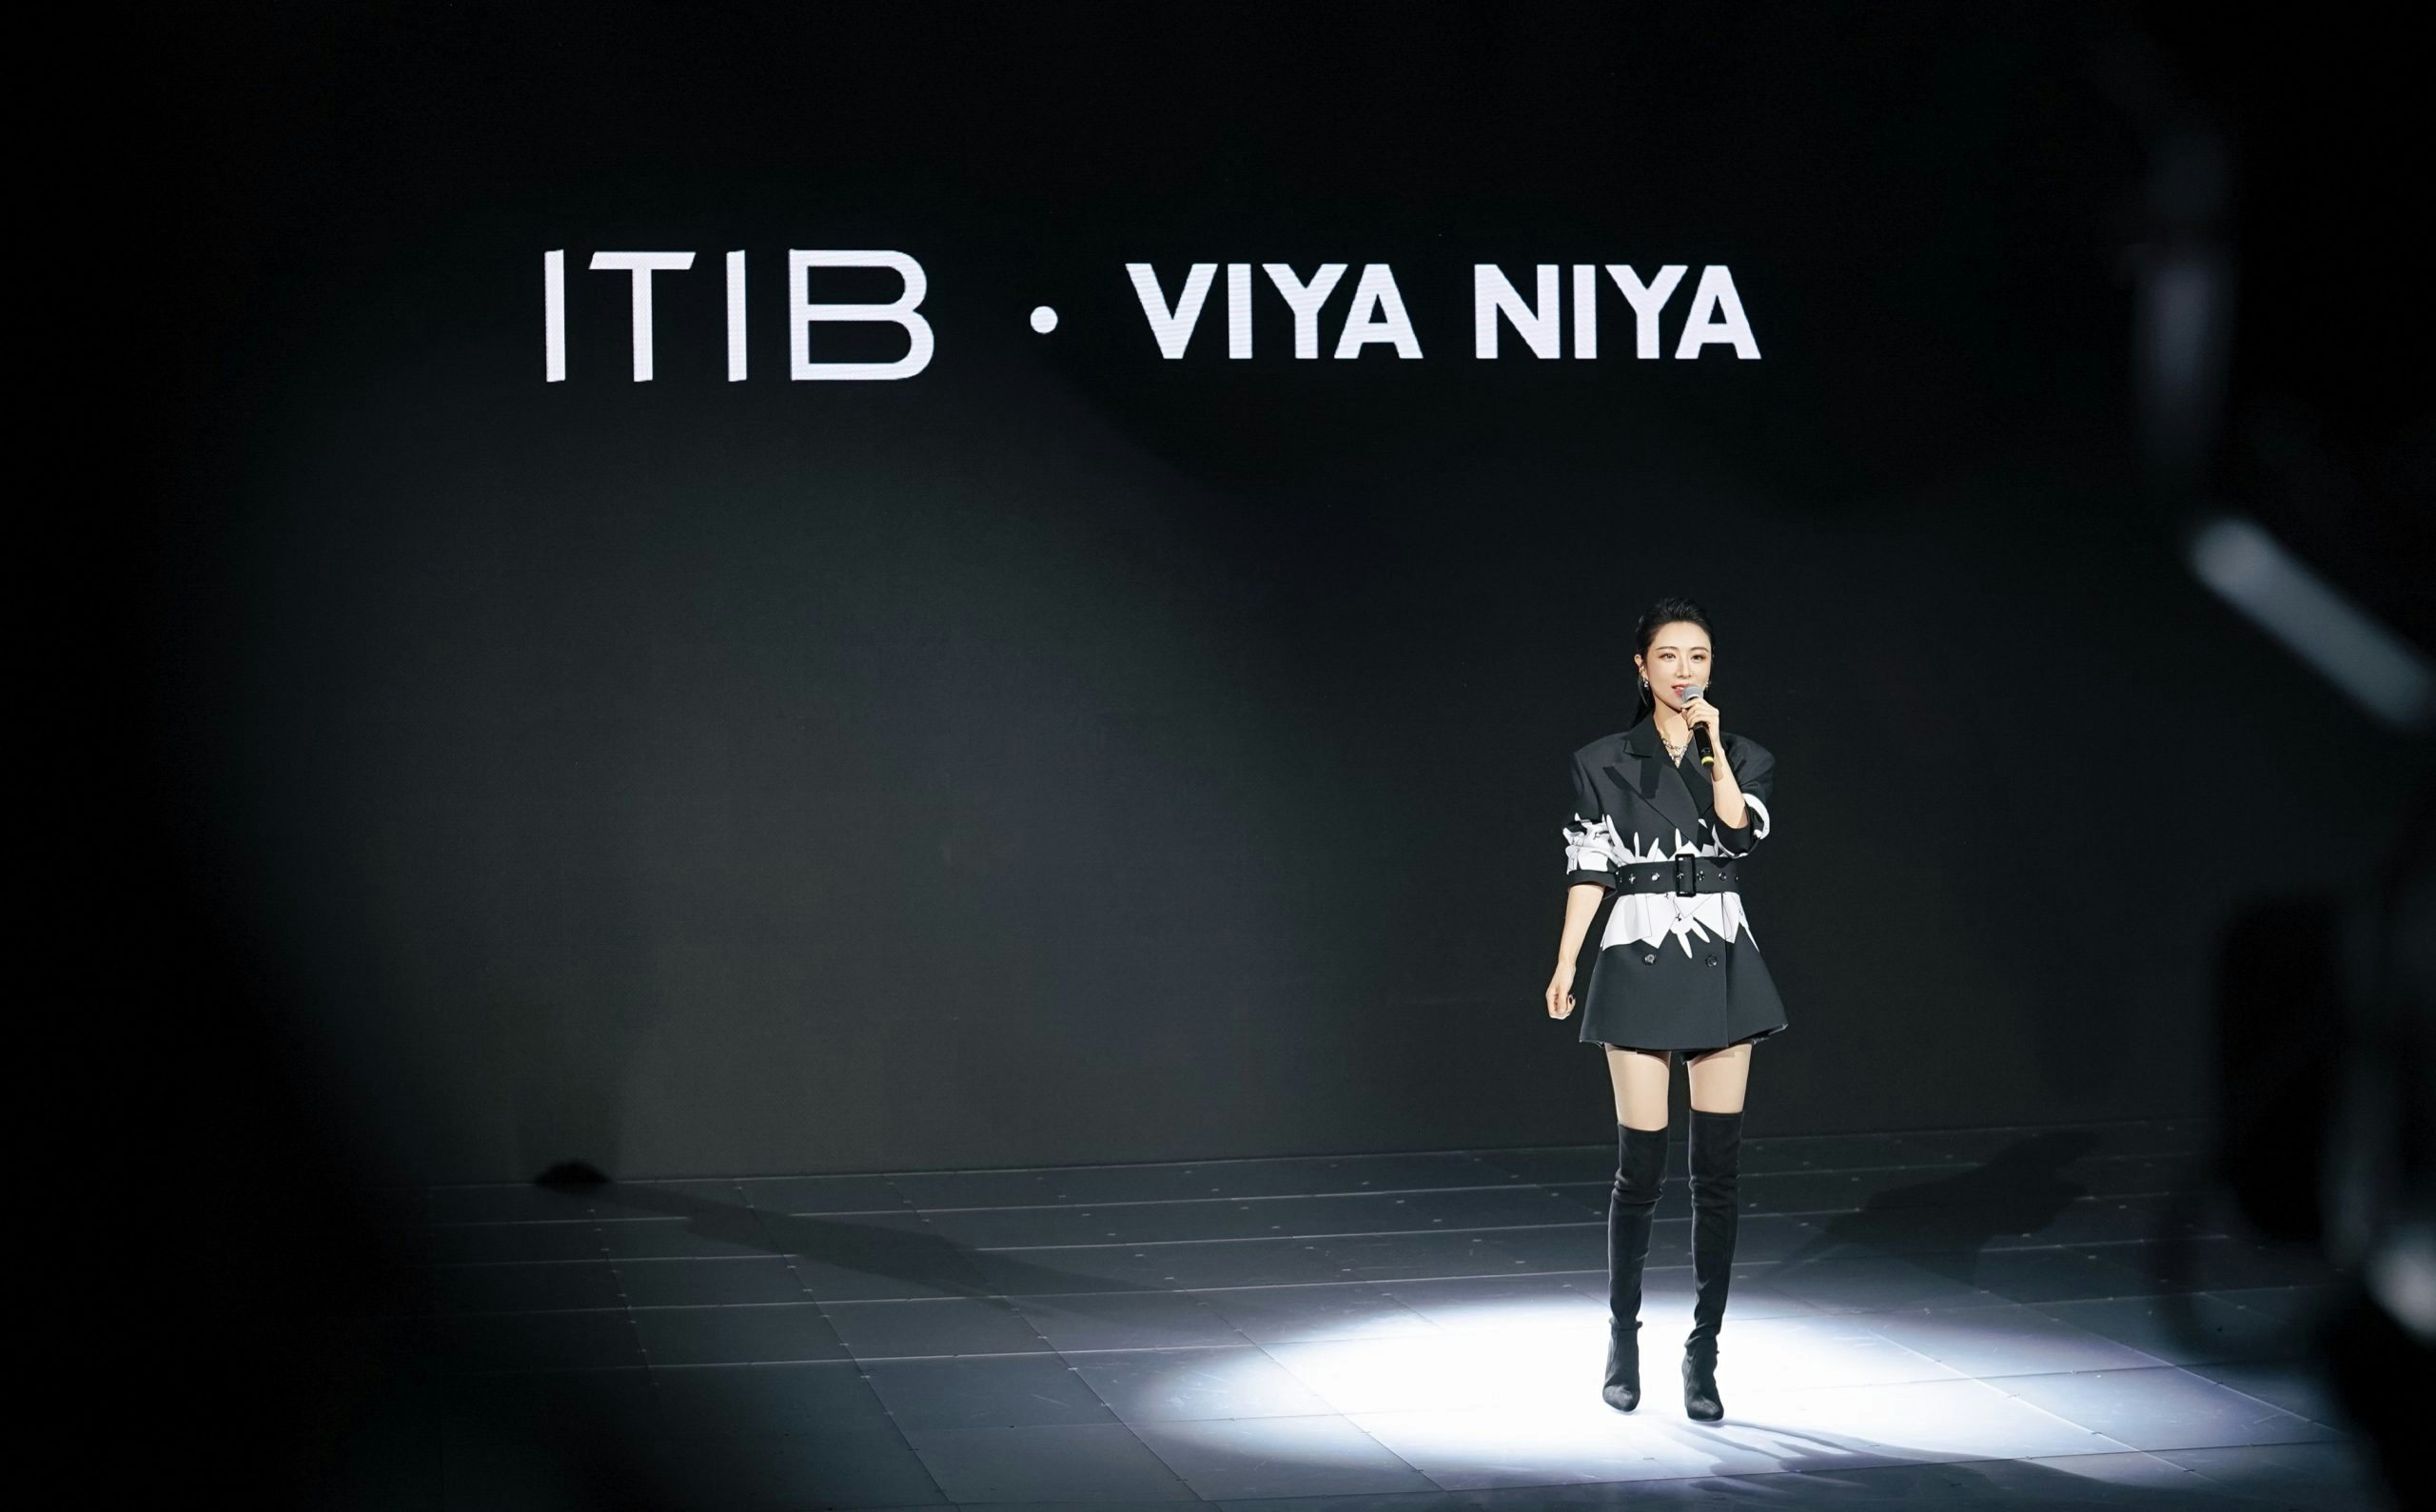 Dressed in Helen Lee for ITIB x Viya Niya, top livestreamer hosted the runway for the launch of her fashion brand. Photo: Helen Lee